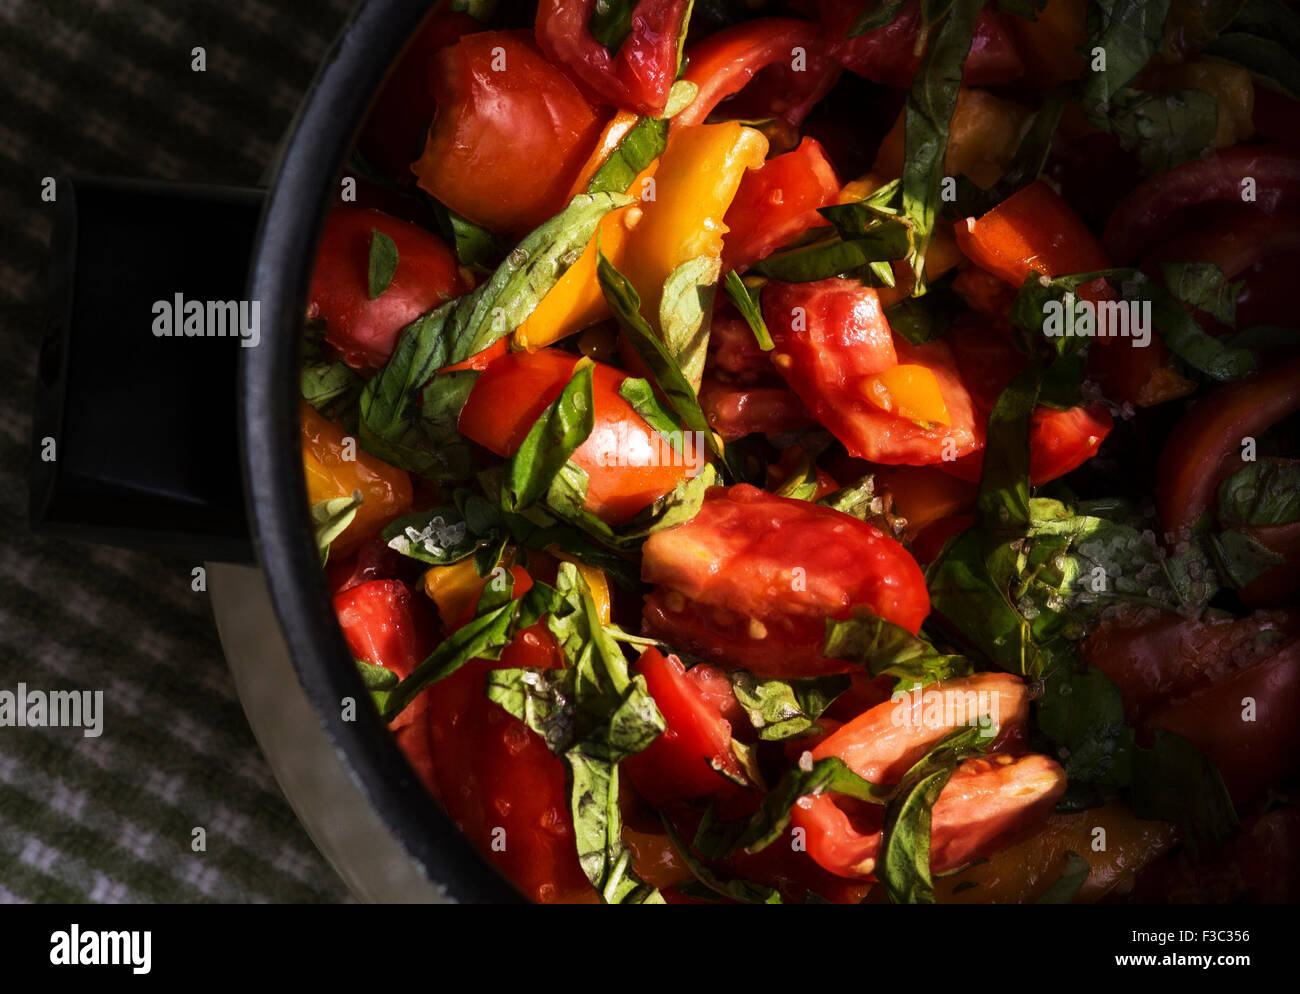 Fresh tomato and basil chopped up and put into a pot ready to cook. Stock Photo